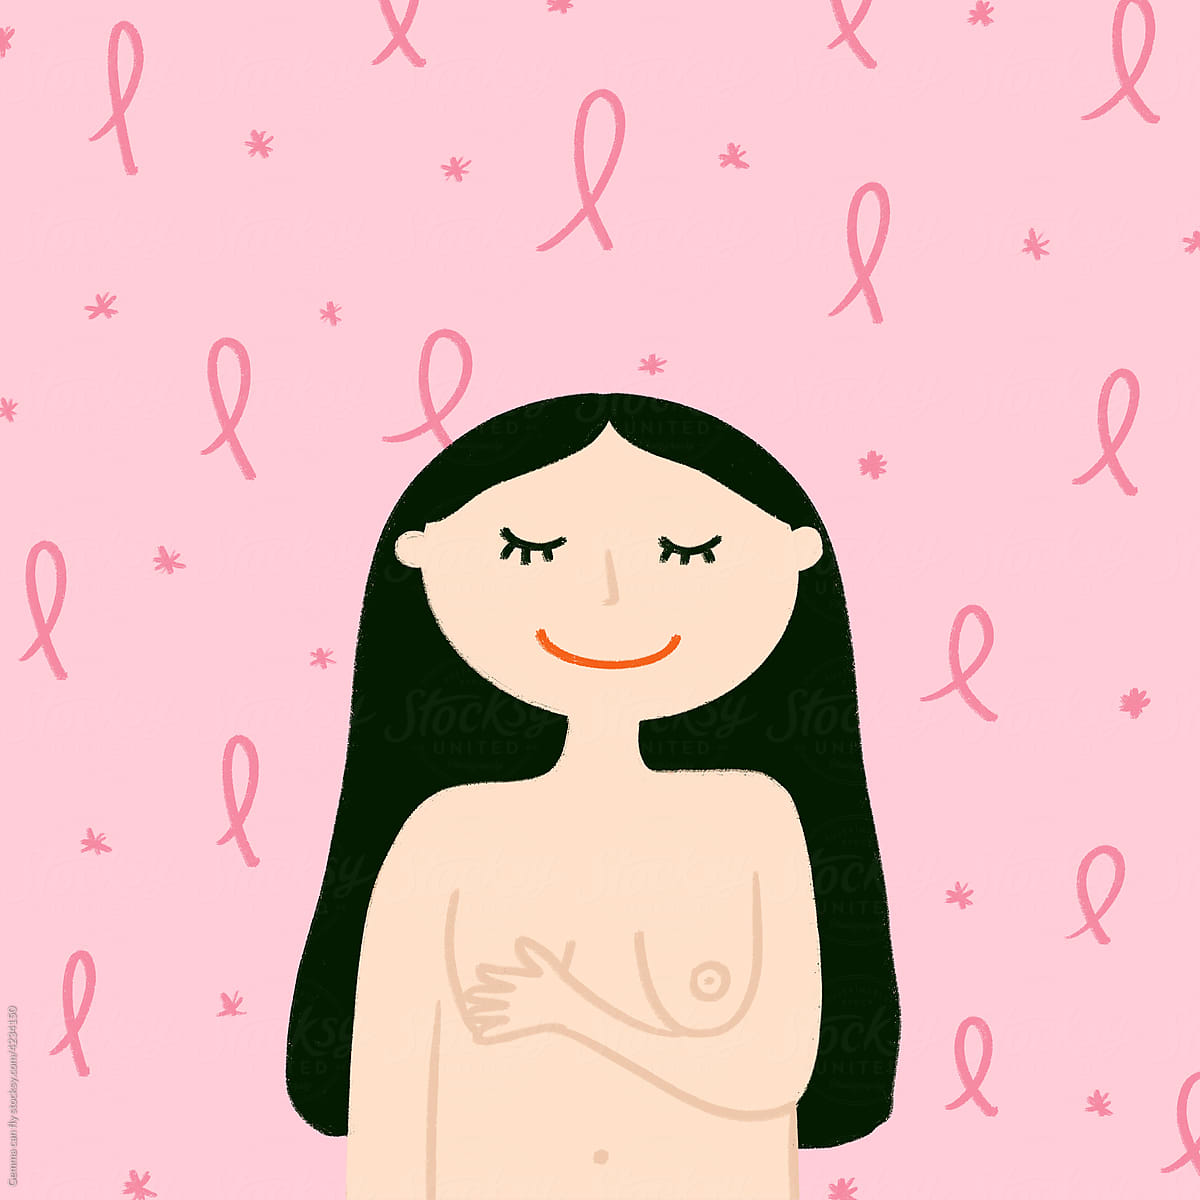 Woman breast cancer prevention illustration